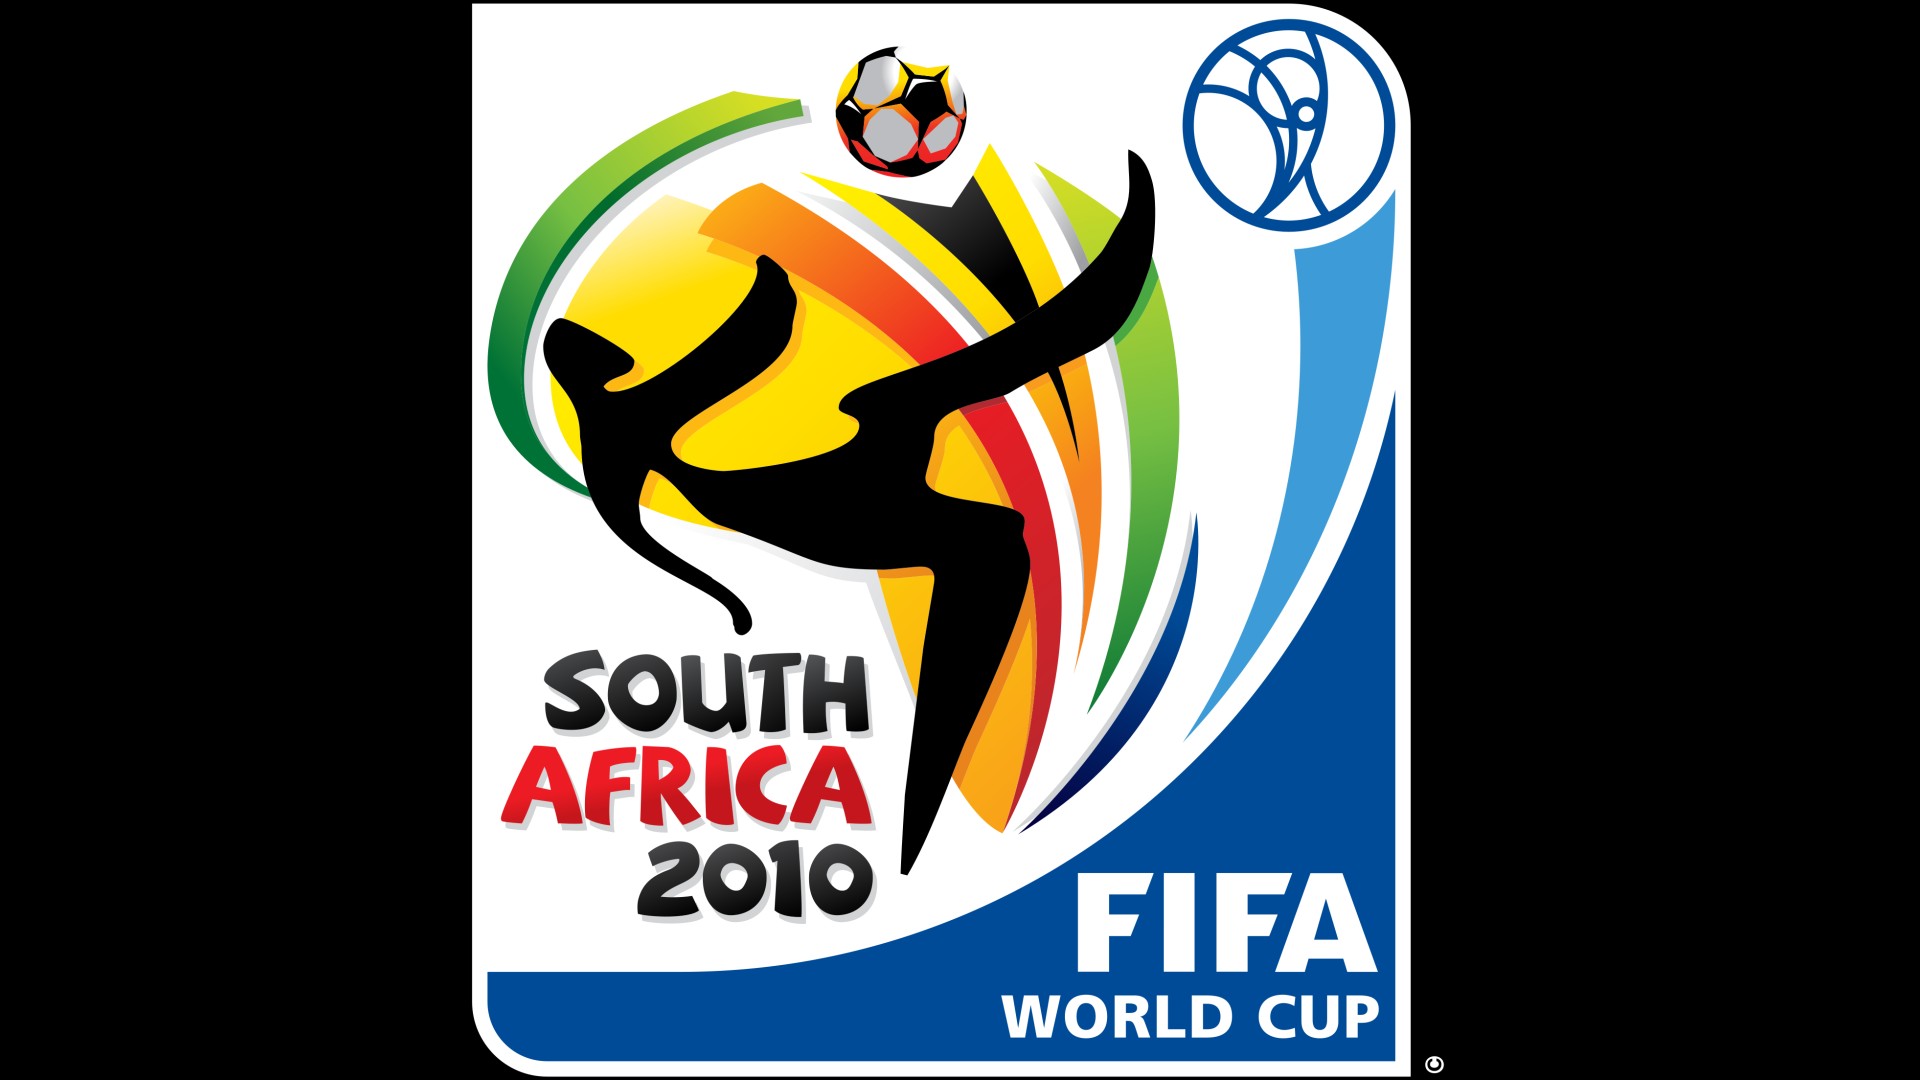 video game, 2010 fifa world cup south africa